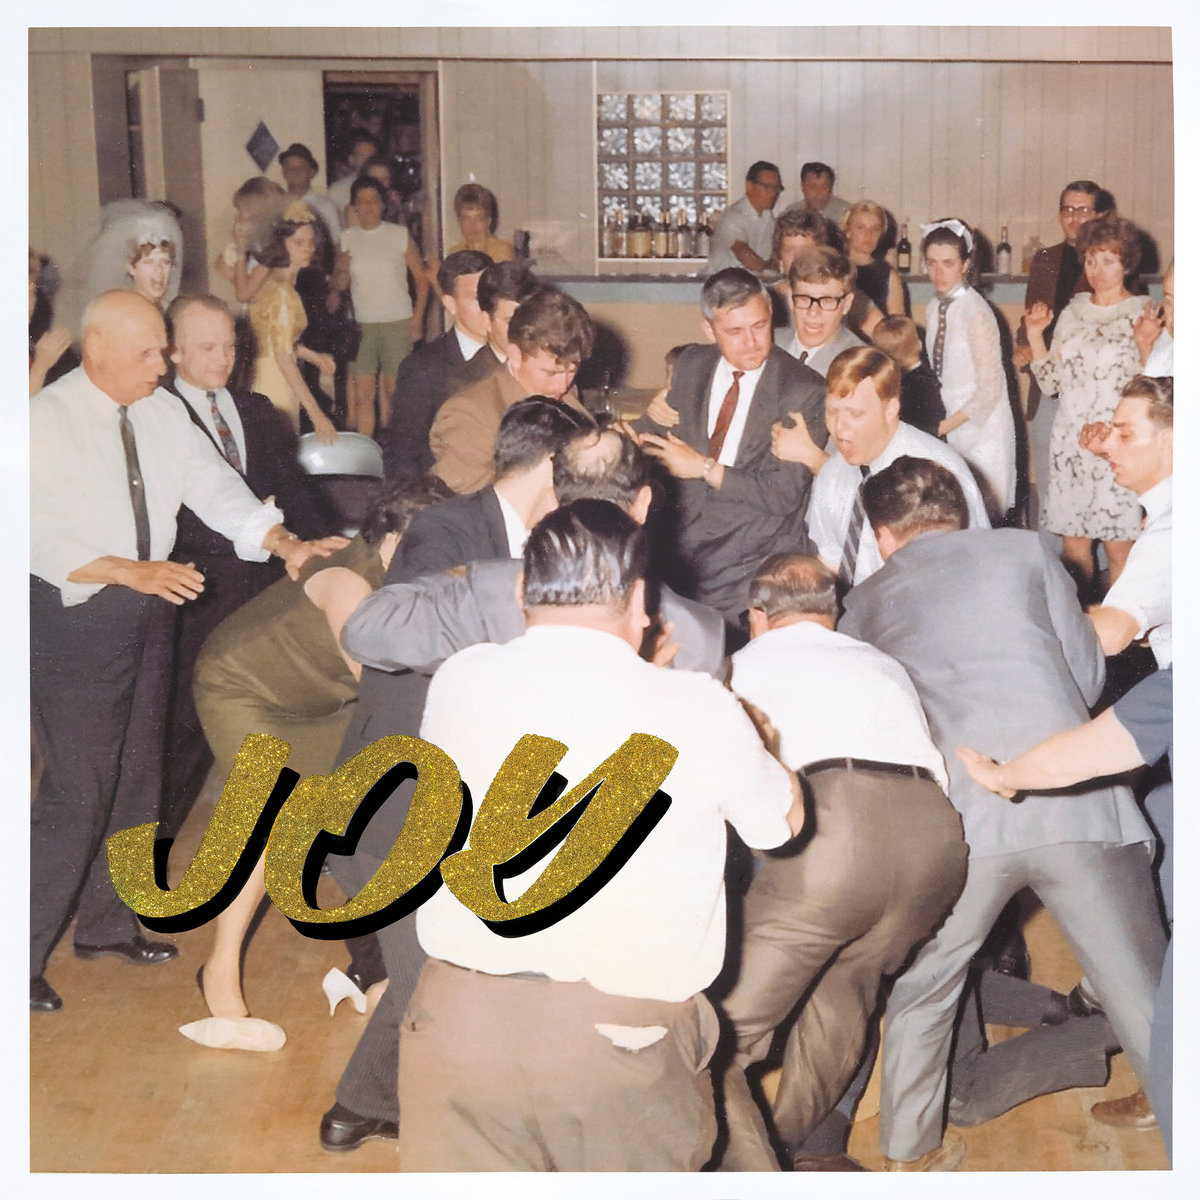 DLES - Joy as an Act of Resistance